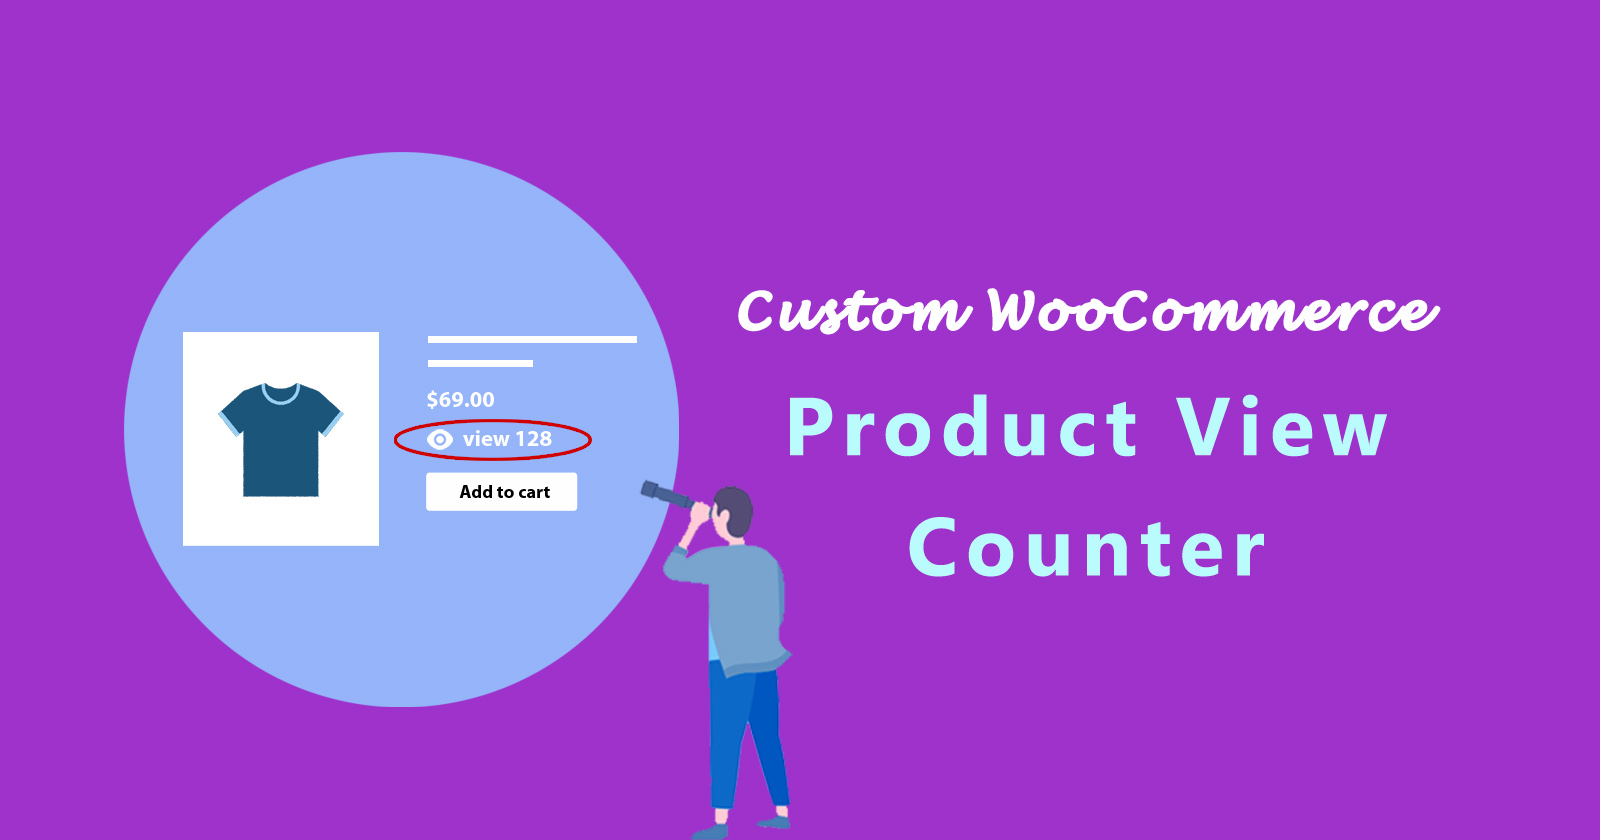 Custom WooCommerce Product View Counter